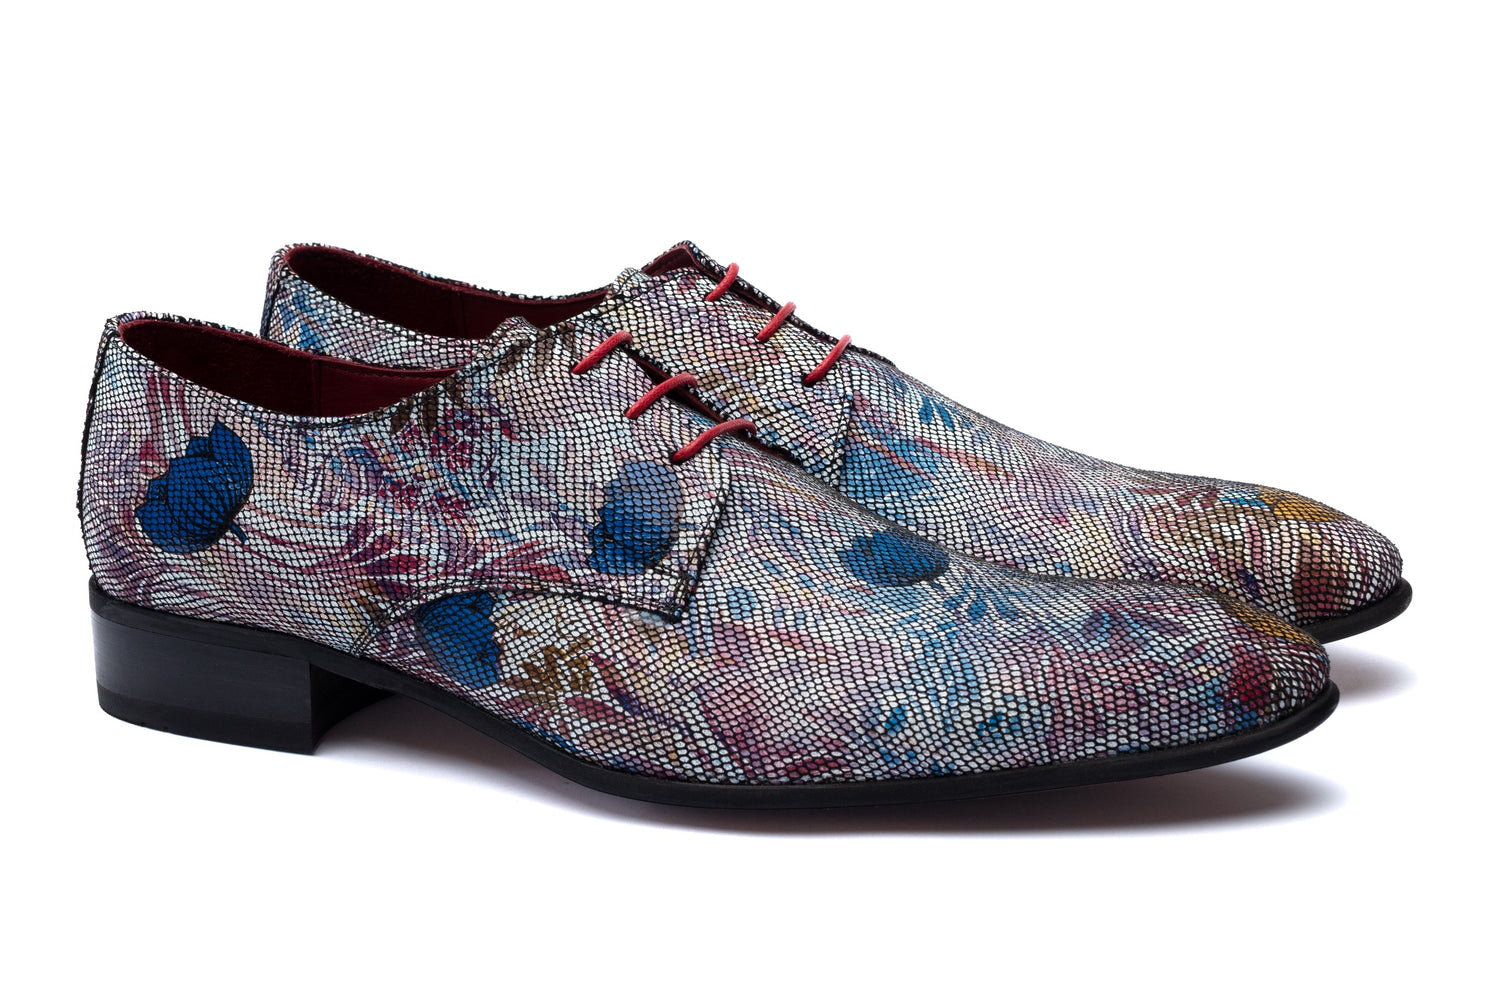 The Tropicana Shoes - Shoes by Urbbana